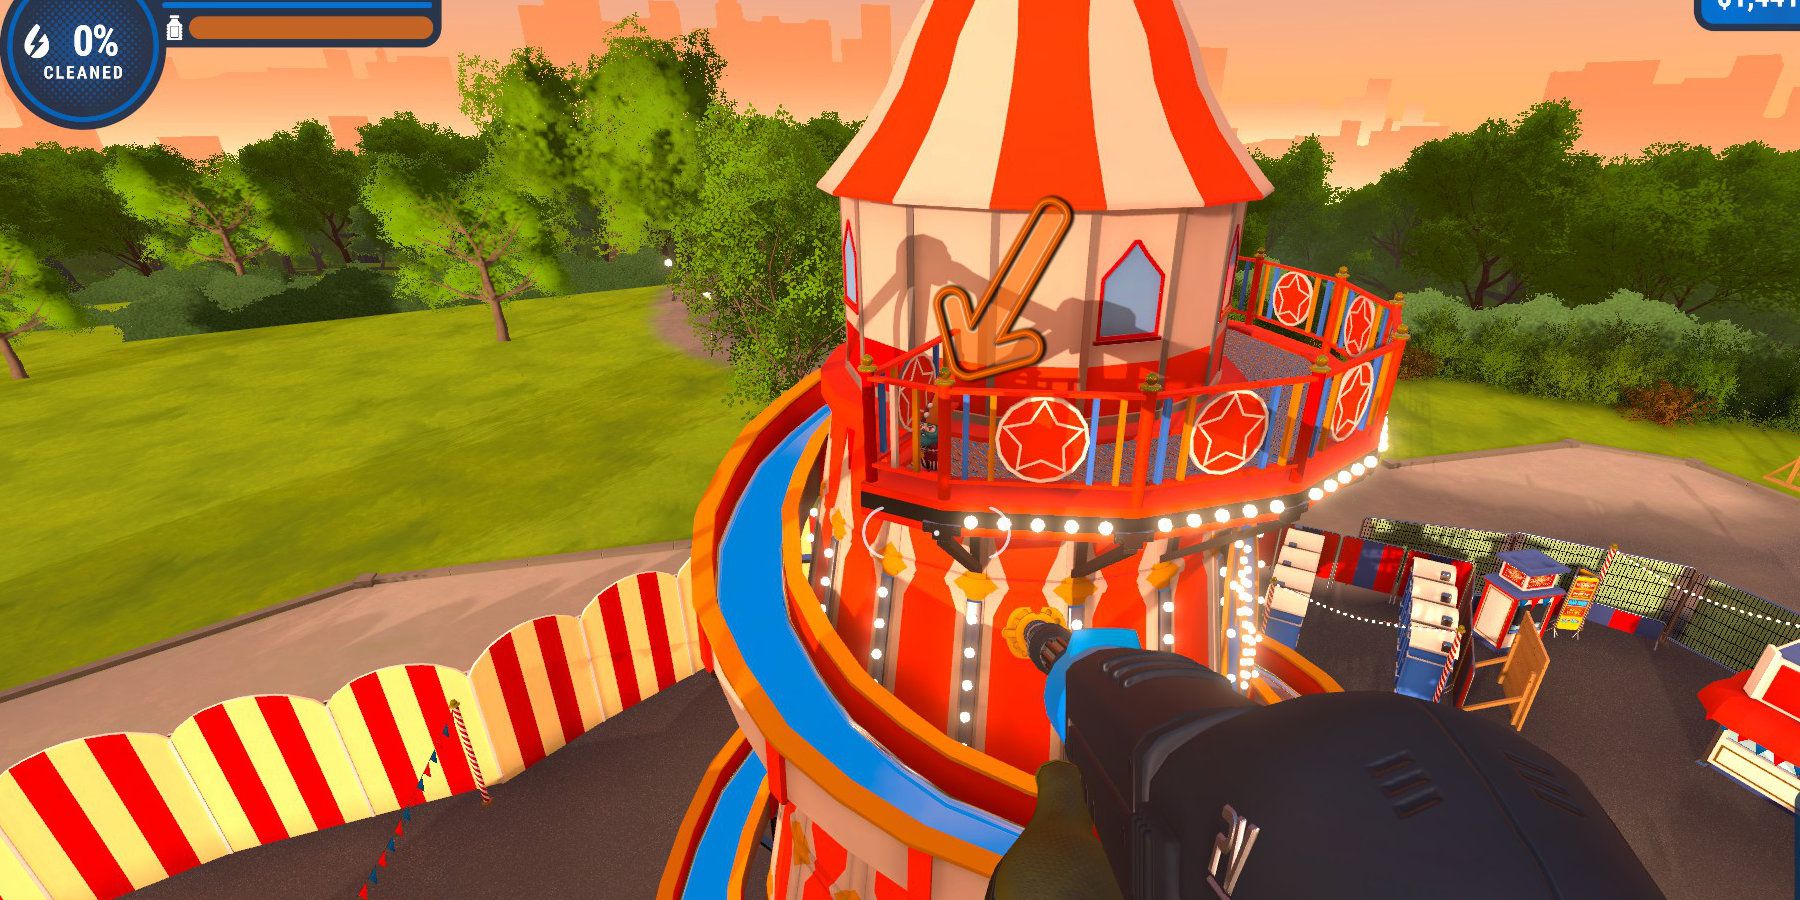 A garden gnome at the top of a carnival slide, highlighted by an arrow.